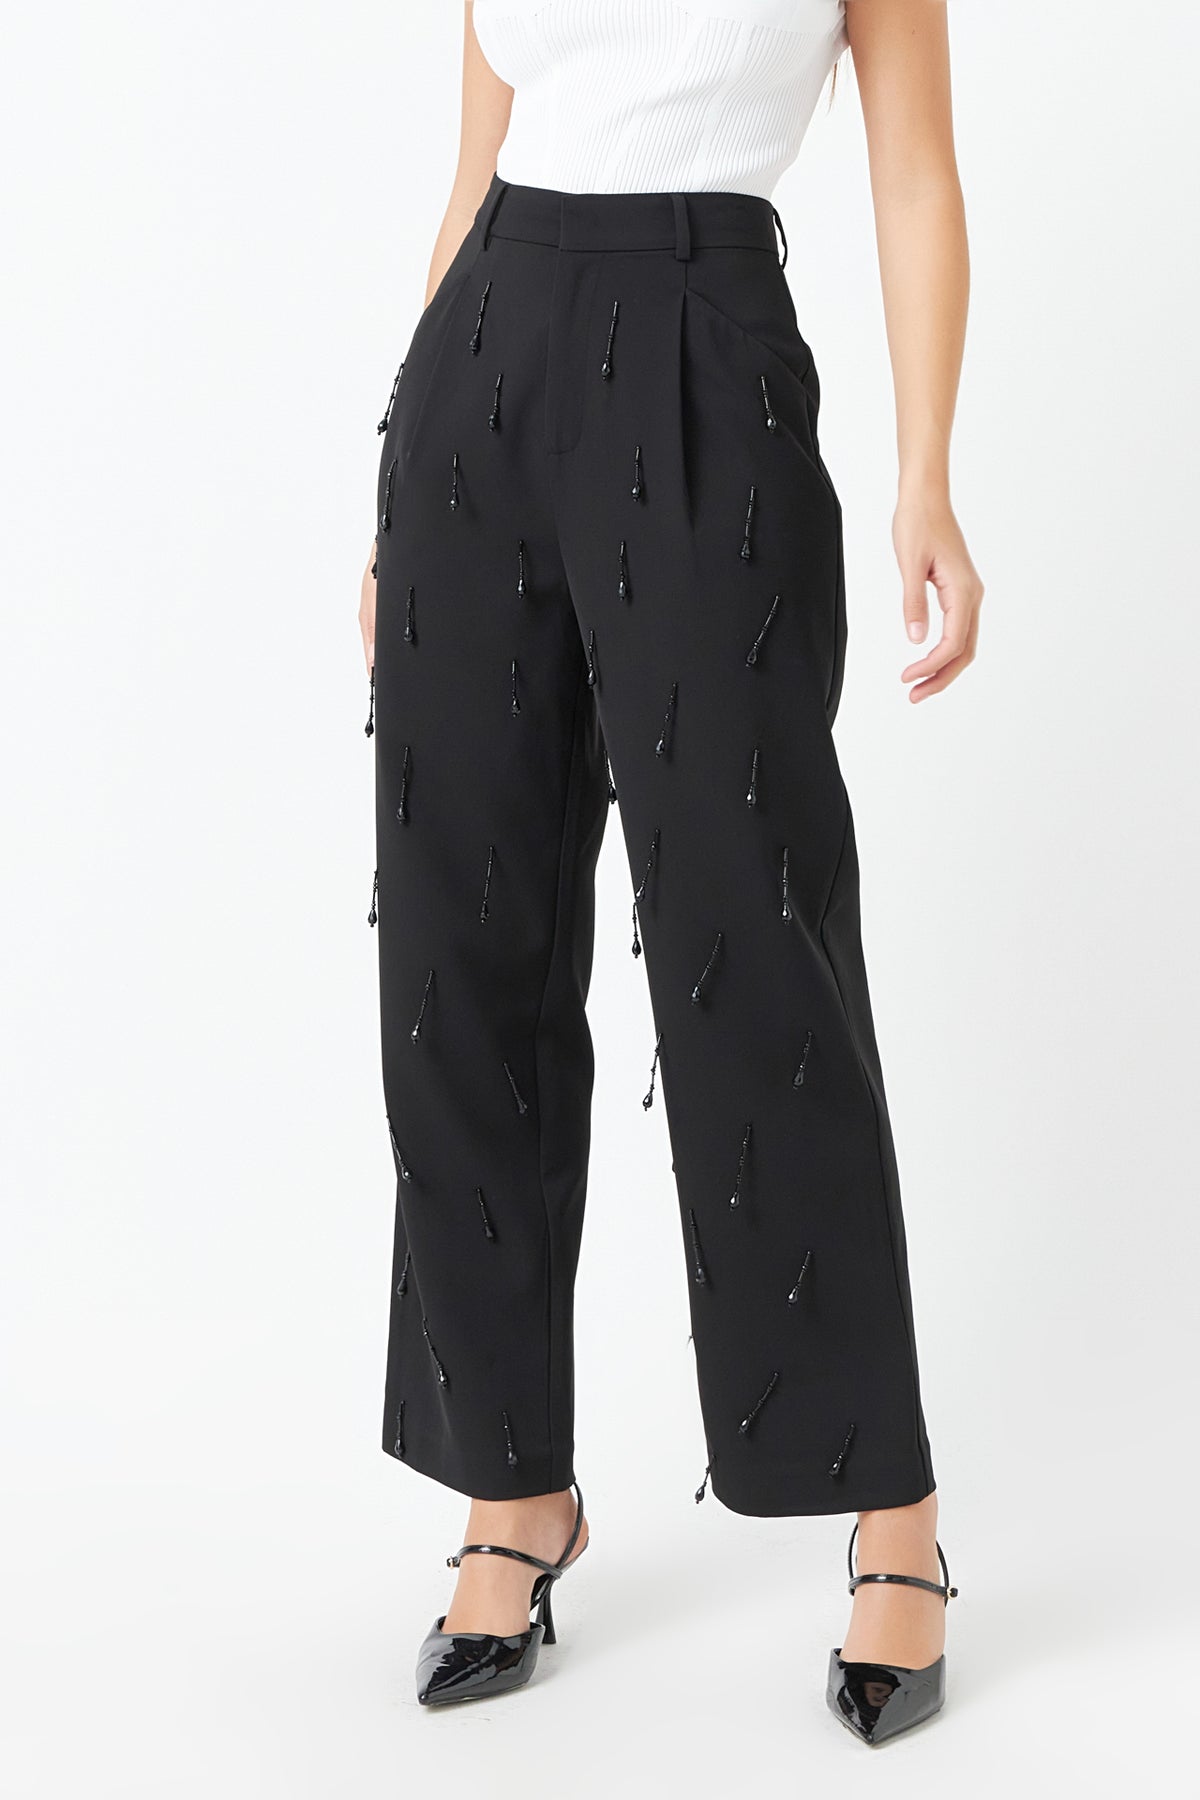 ENDLESS ROSE - Beaded Pants - PANTS available at Objectrare